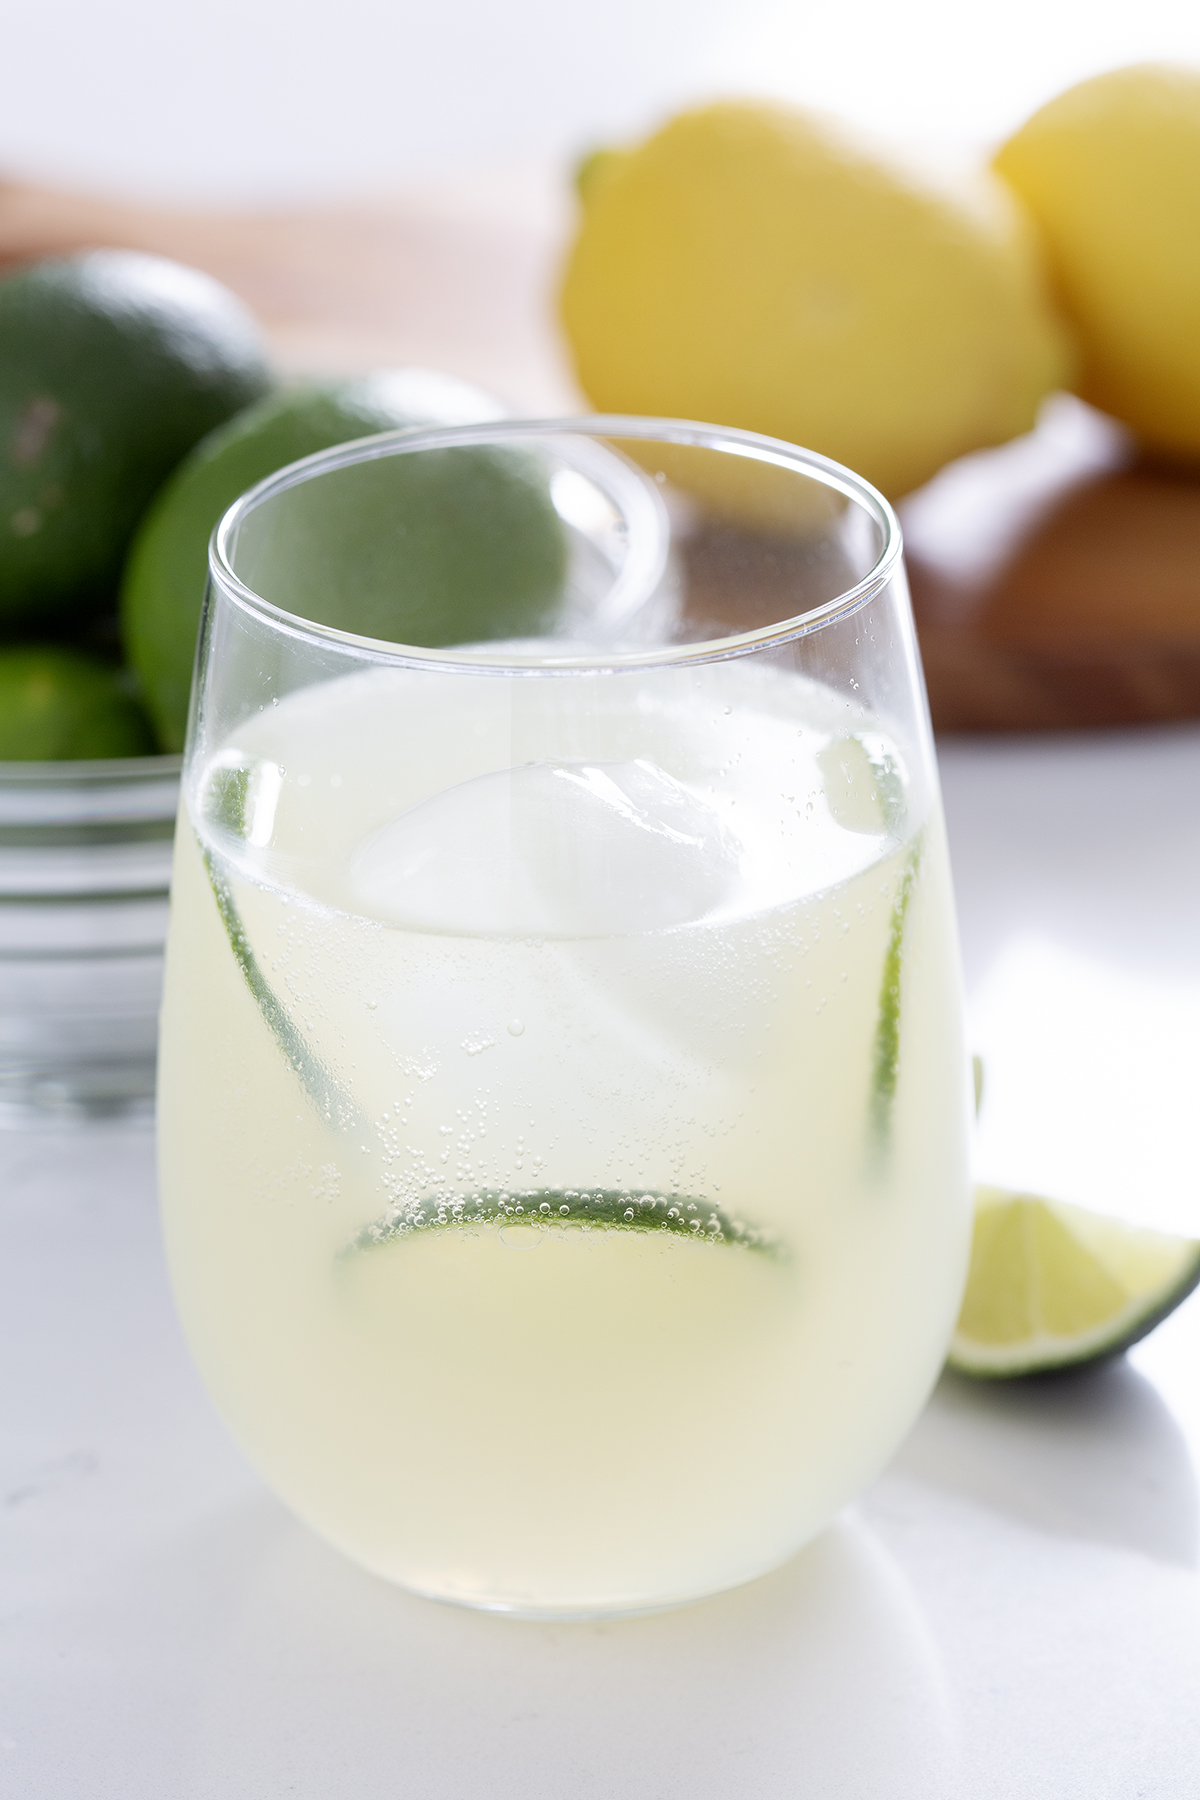 Stemless wine glass filled with gin rickey surrounded by lemons and limes